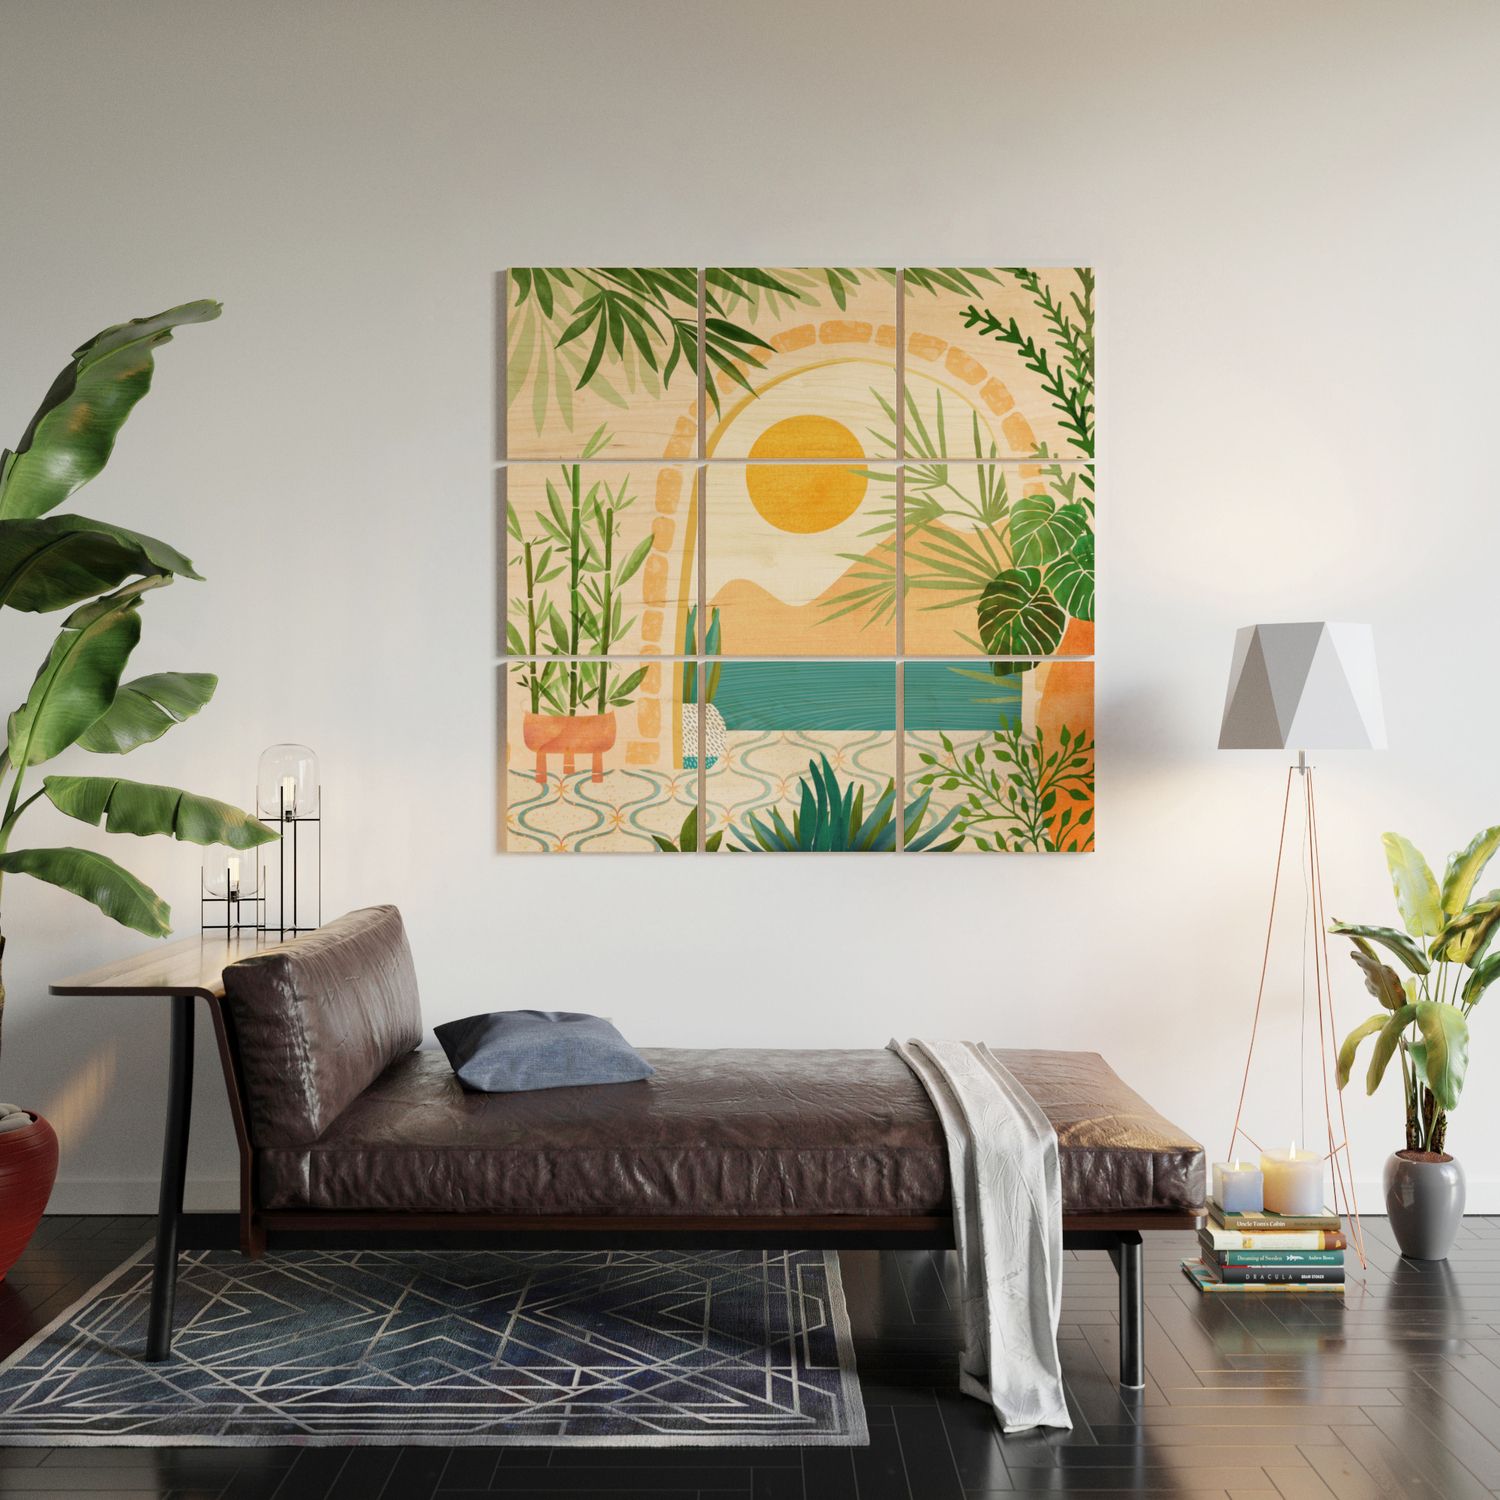 Villa View Tropical Landscape / Villa Series Wood Wall Artmodern  Tropical | Society6 Inside Best And Newest Villa View Wall Art (View 3 of 20)